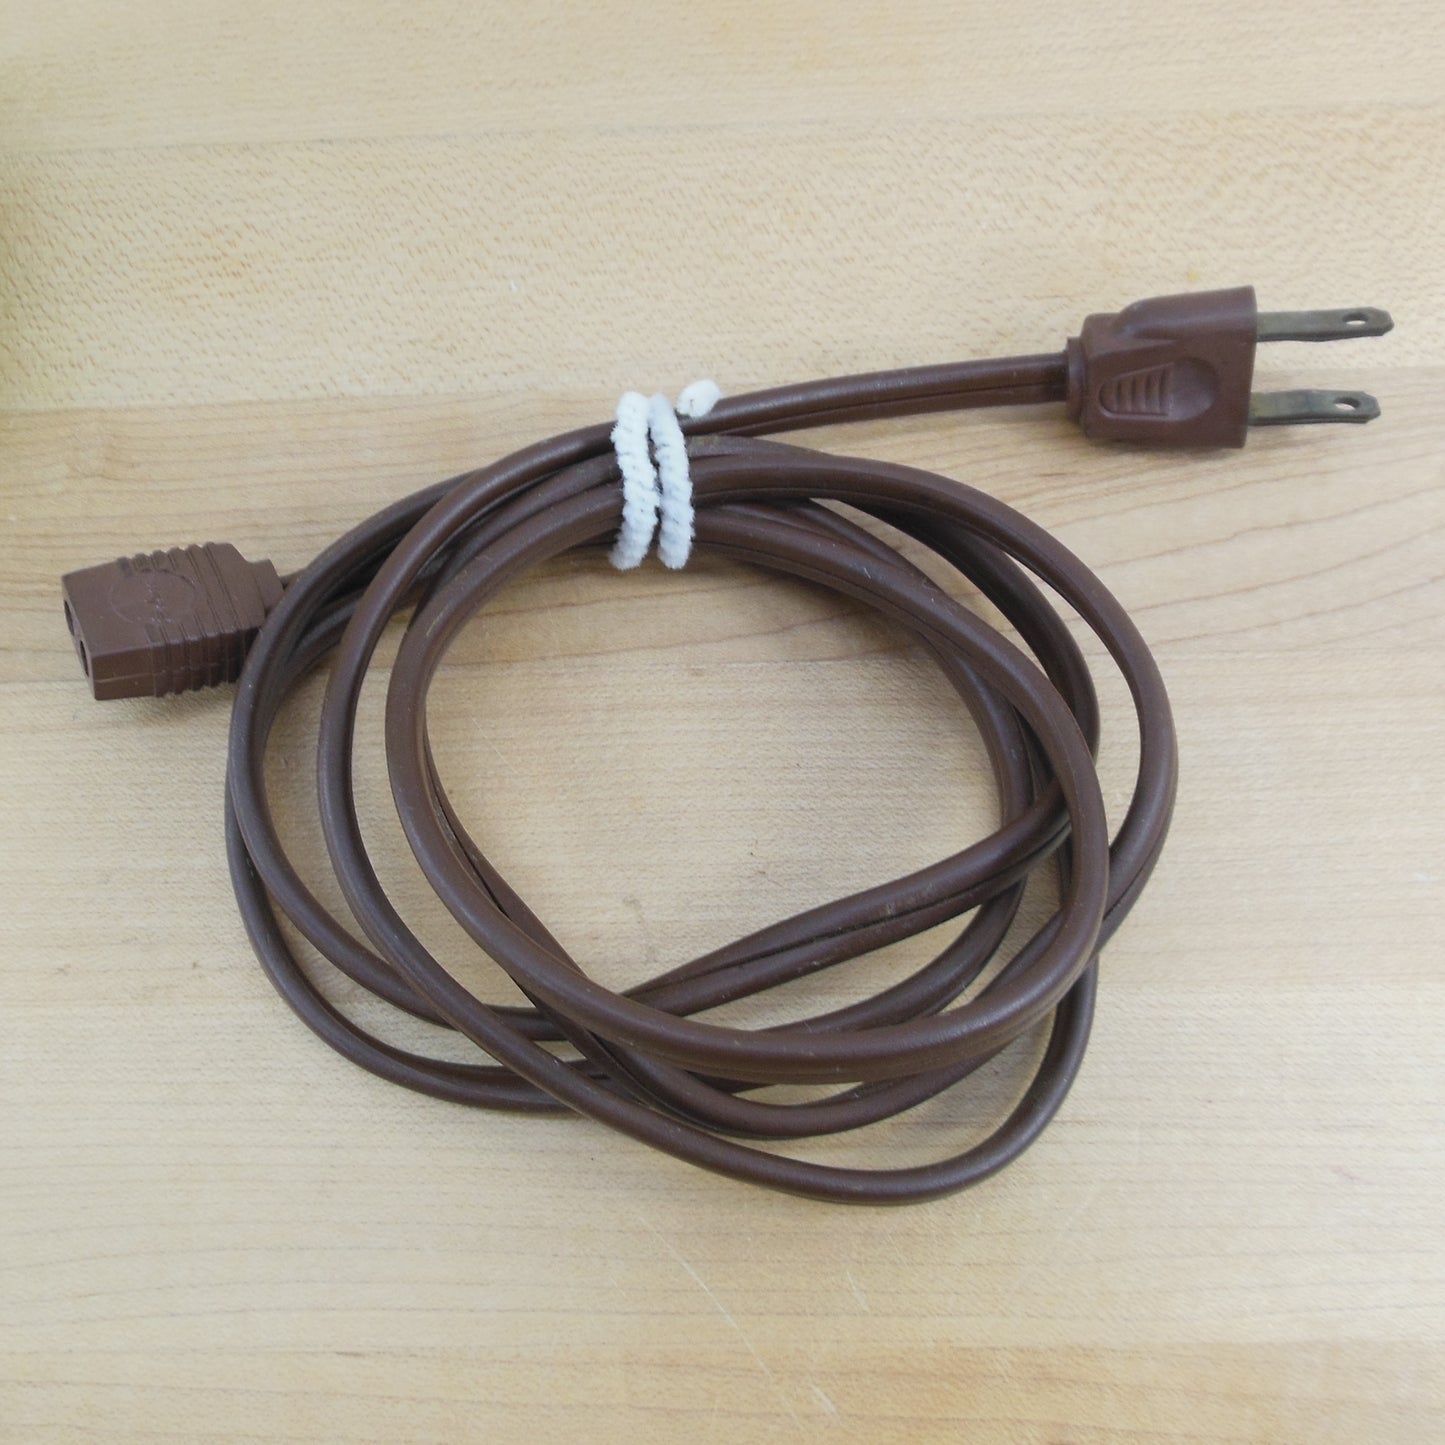 Salton Hotray Brown Replacement Power Cord, Wood Handle, Feet, Knob - Your Choice